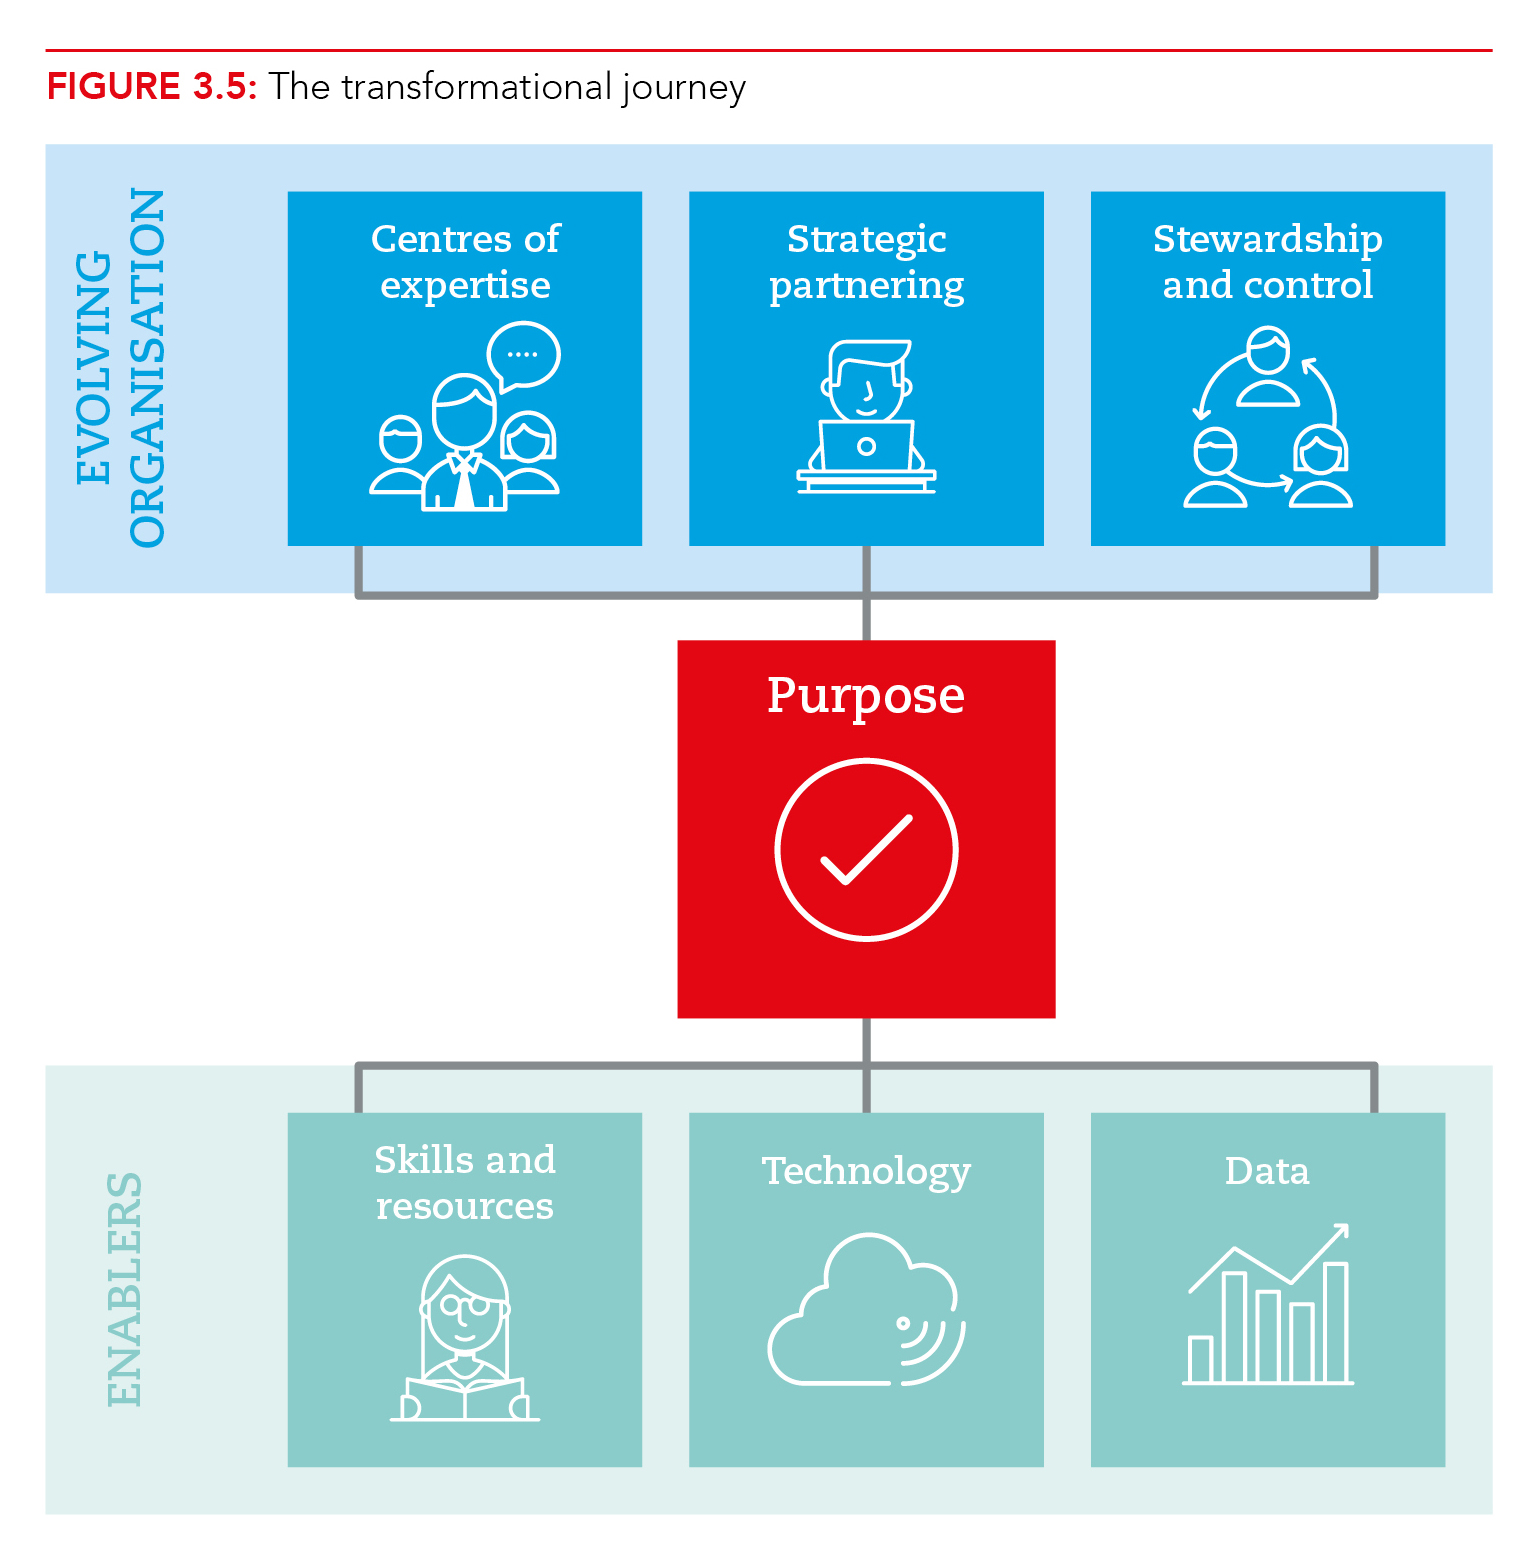 An illustration of the transformational journey. Centred around purpose, this involves a bottom line of enablers including skills and resources, technology and data; and an evolving organisational design based around centres of expertise, strategic partnering and stewardship and control.